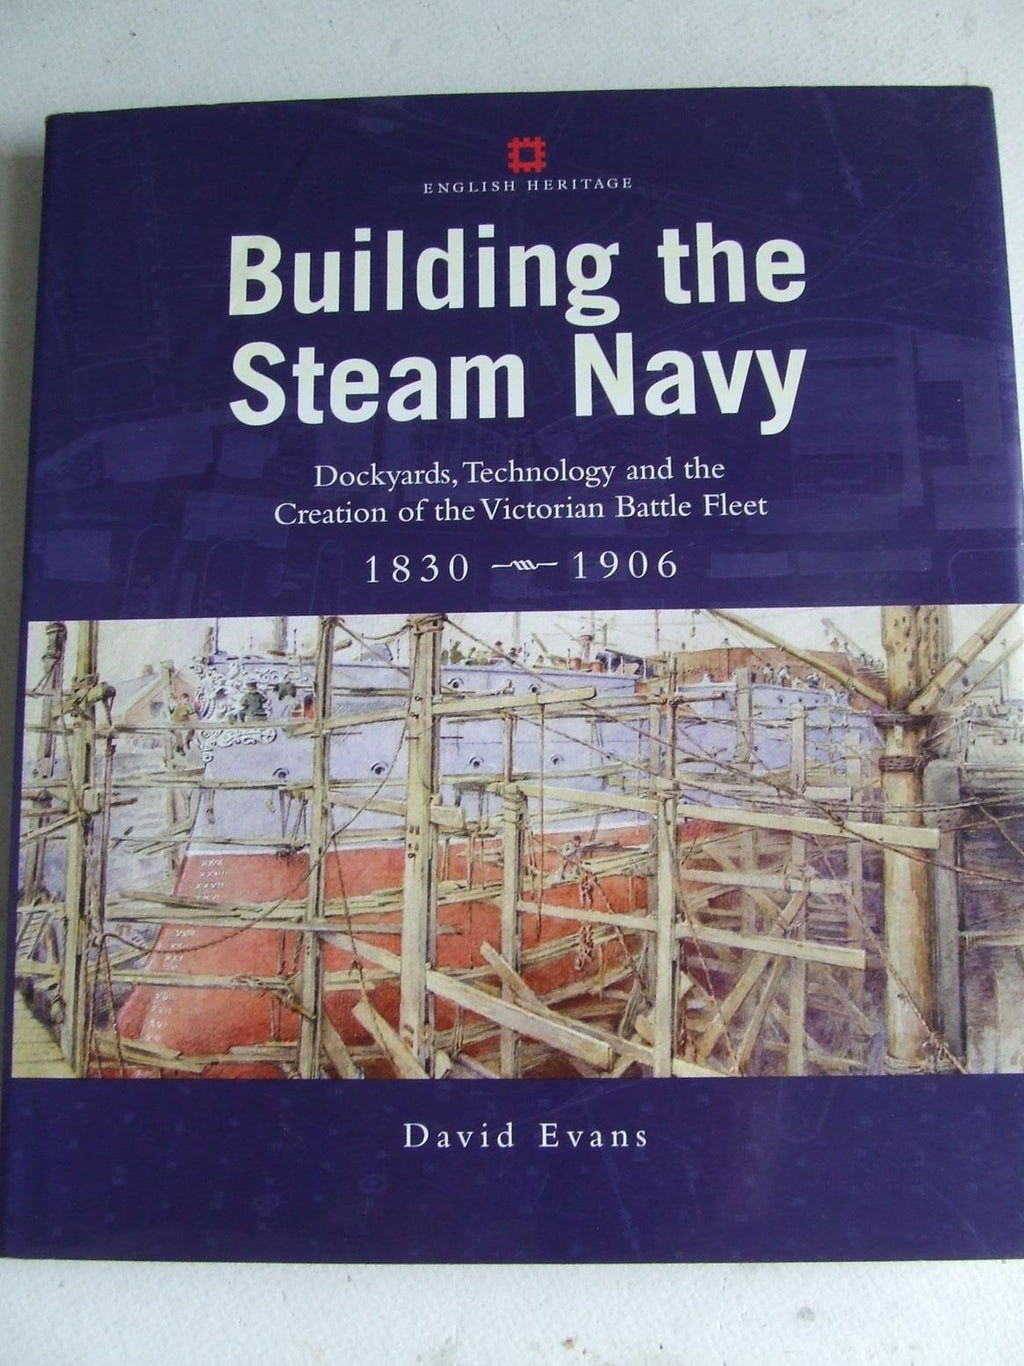 Building the Steam Navy